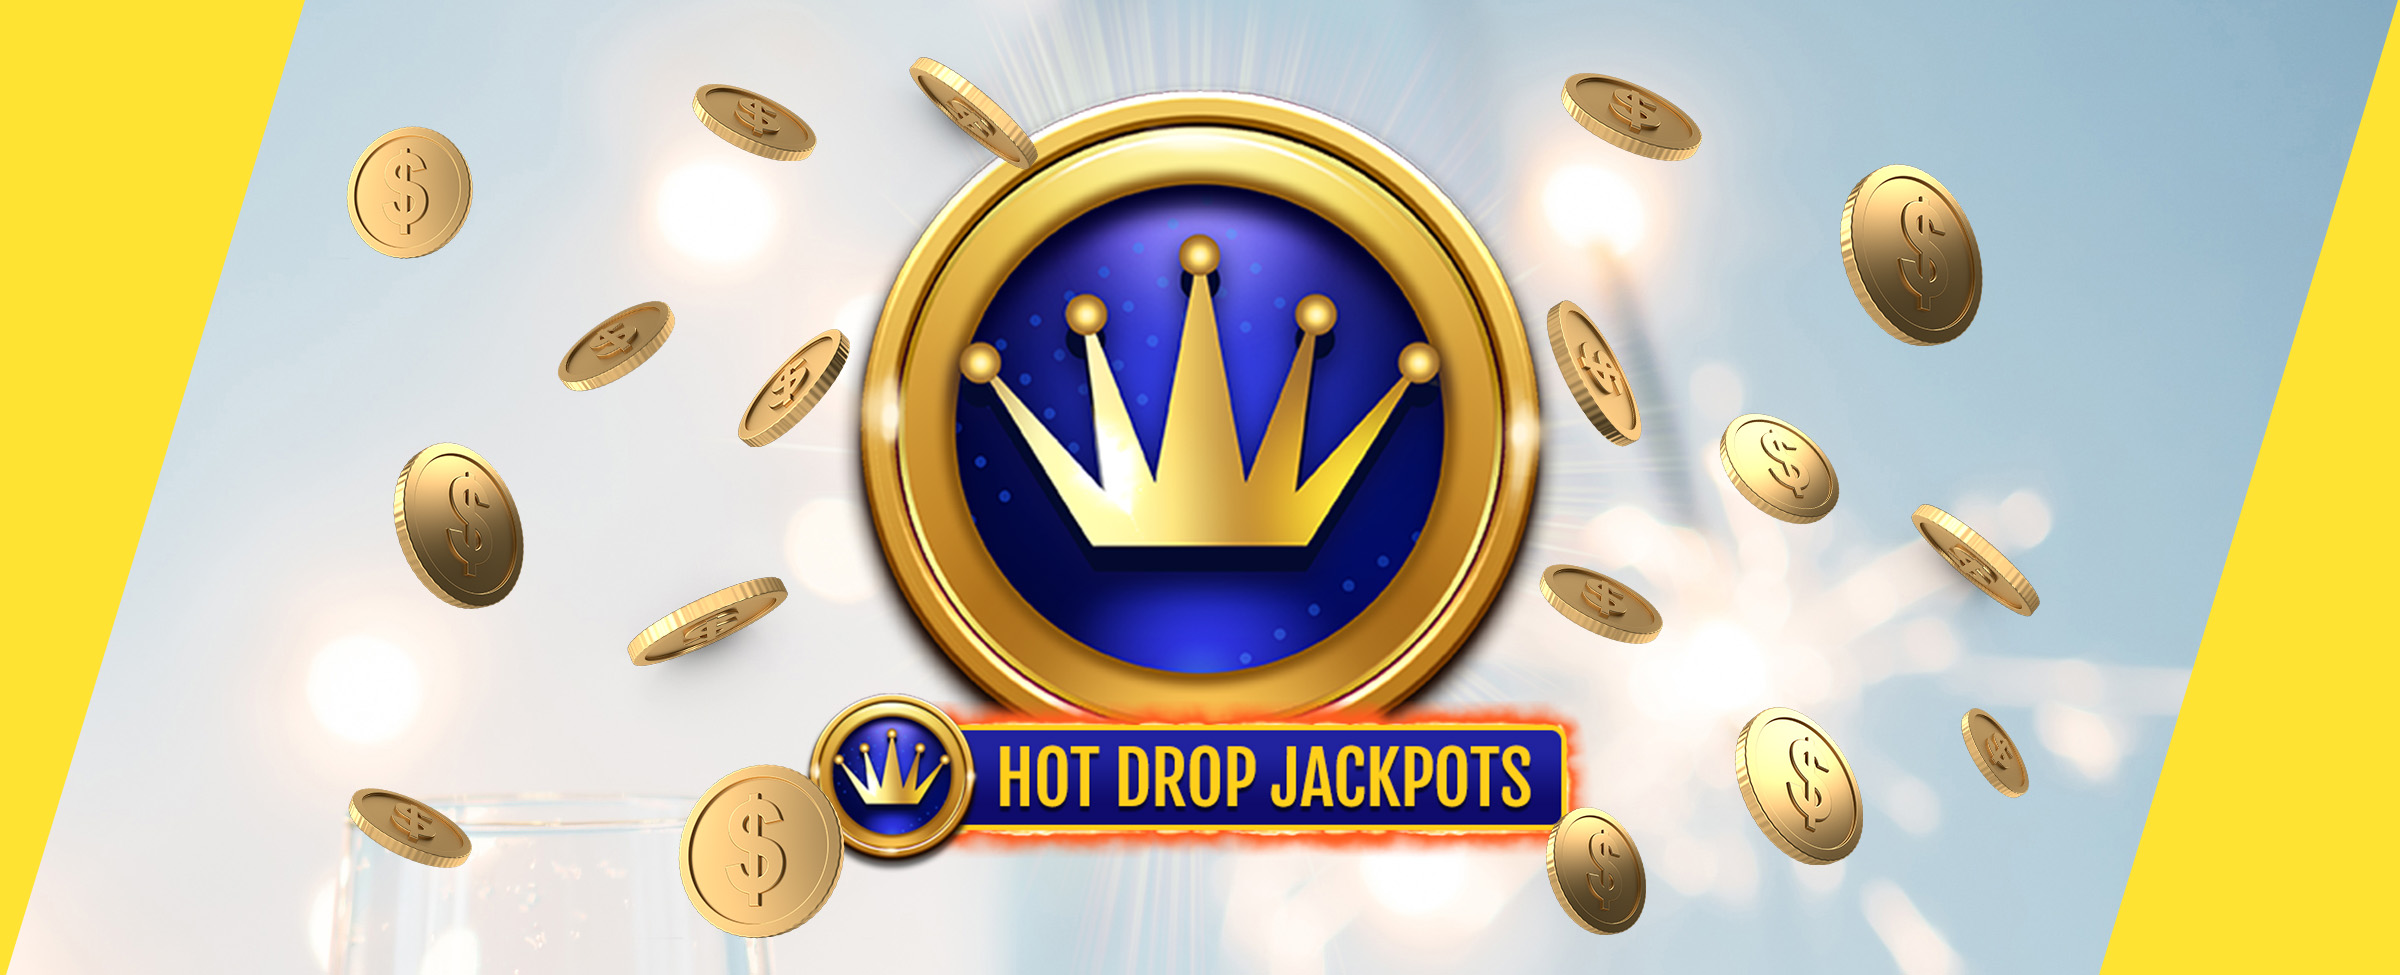 A large logo featuring Cafe Casino’s Hot Drop Jackpots is positioned in the center of the image, surrounded by floating gold coins, set against a blue-tinged background with bright lights.